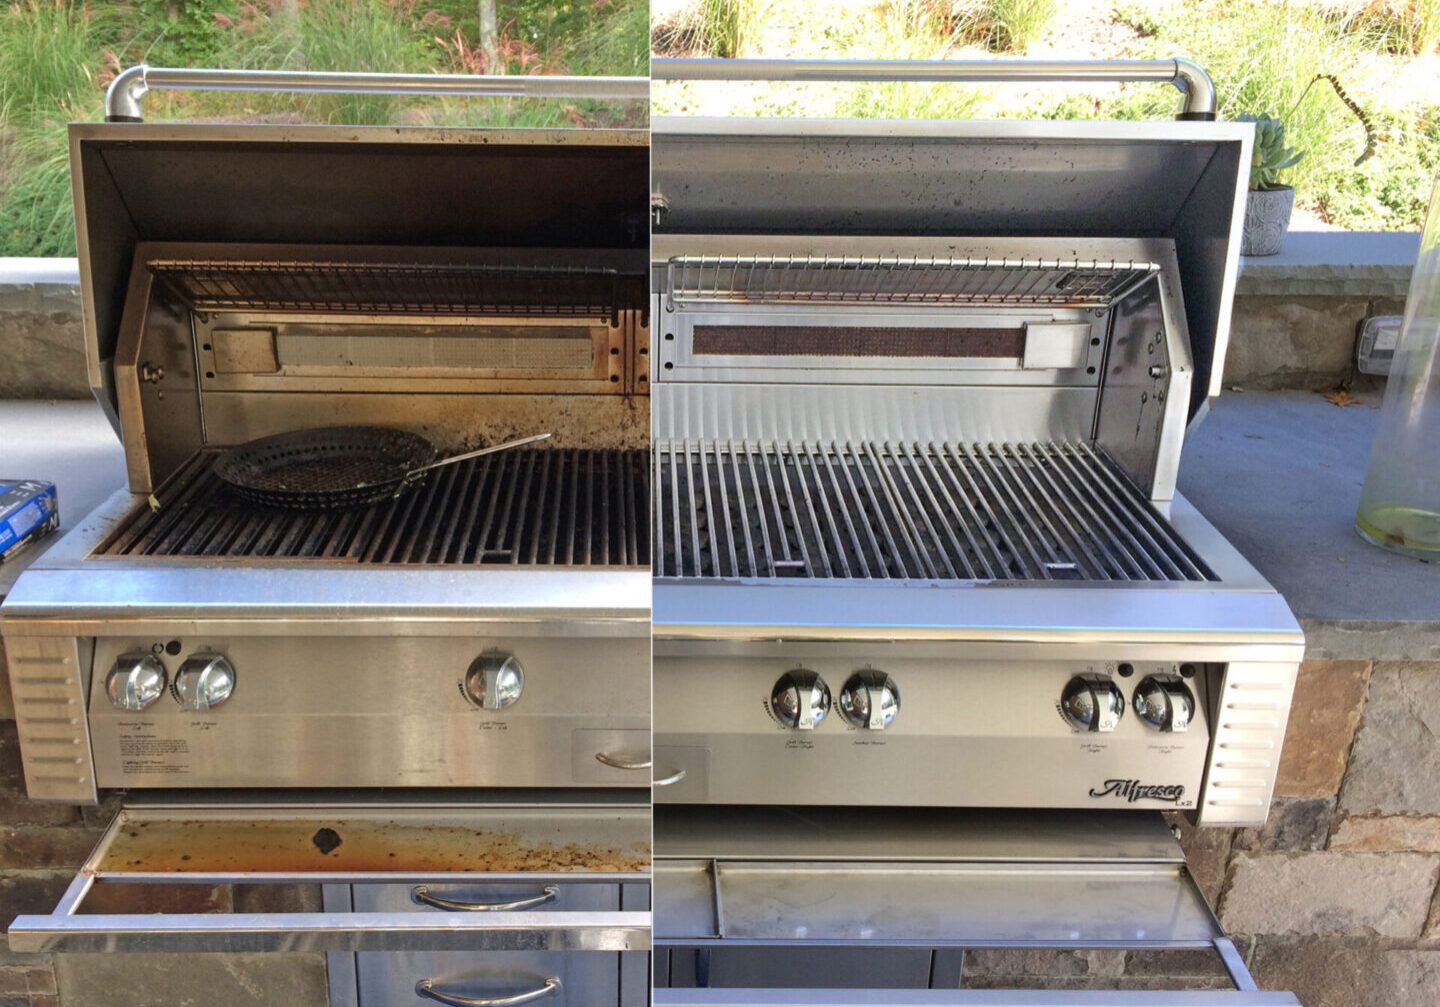 Alfresco grill Before and after bbq cleaning